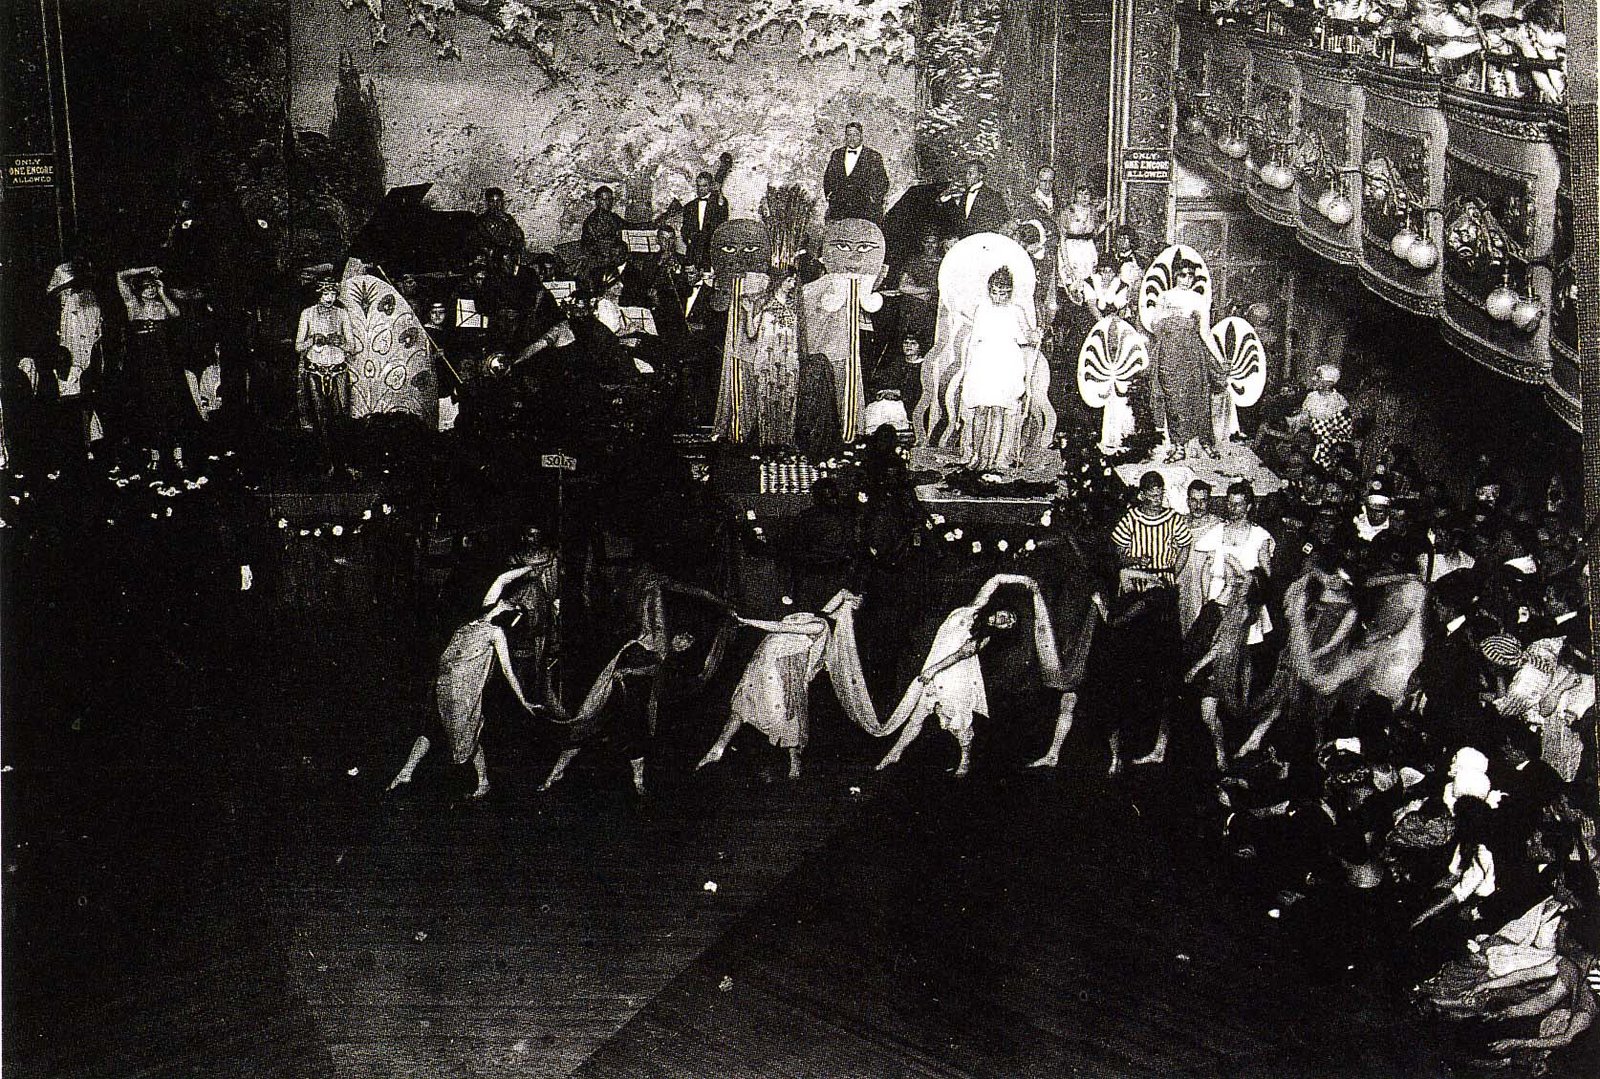 Drag masquerade at NYC's Webster Hall in the 1920s